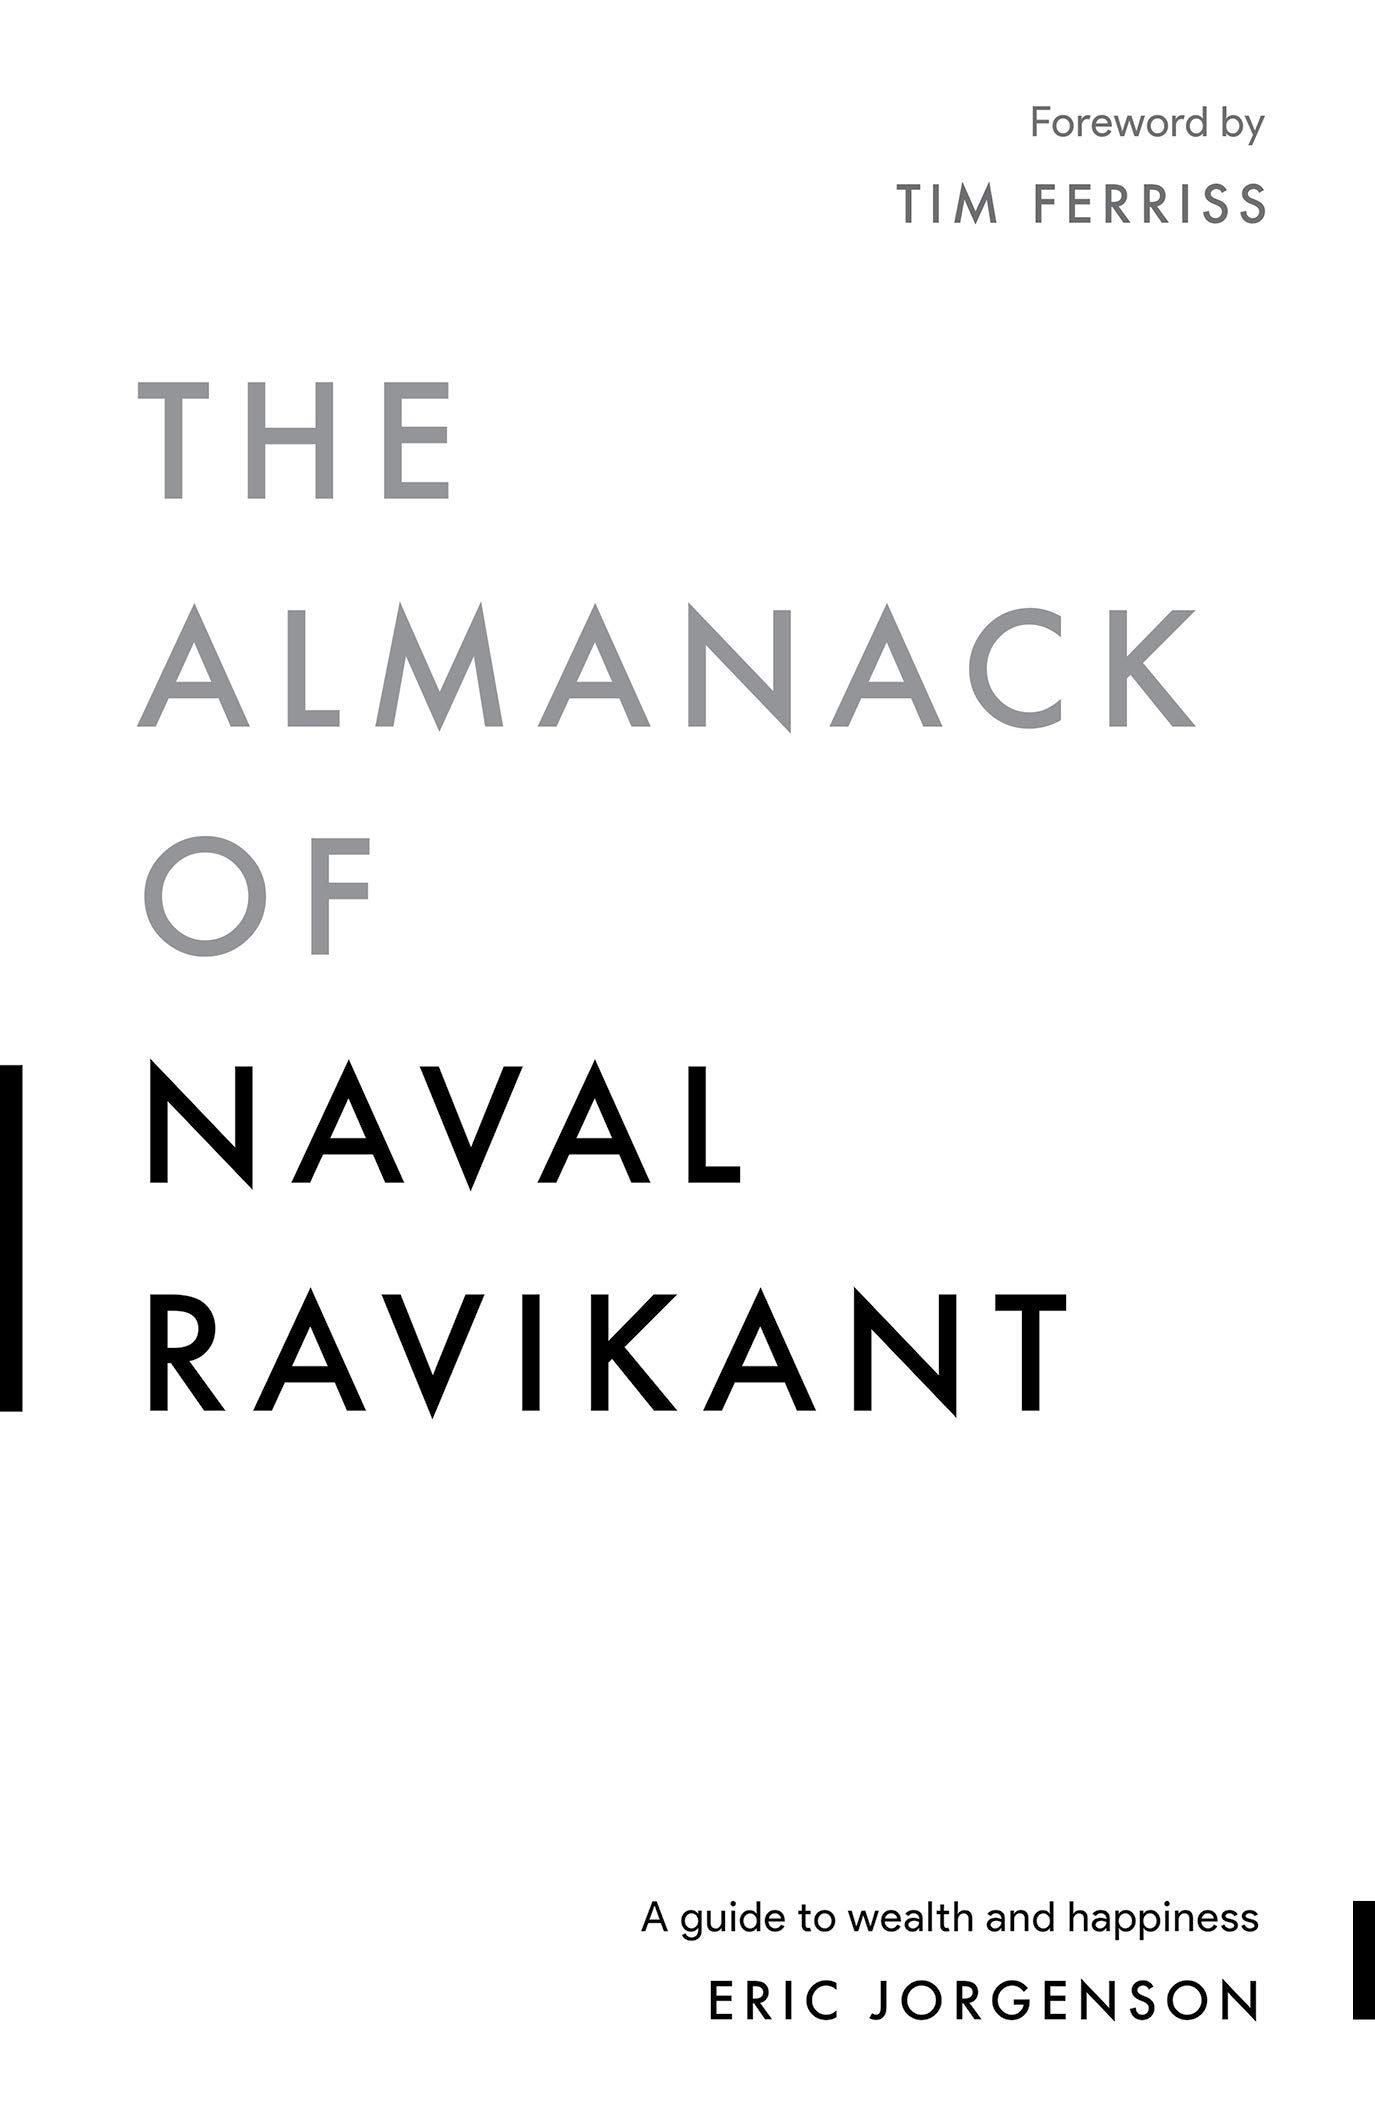 The Almanack of Naval Ravikant book cover on the LBS website